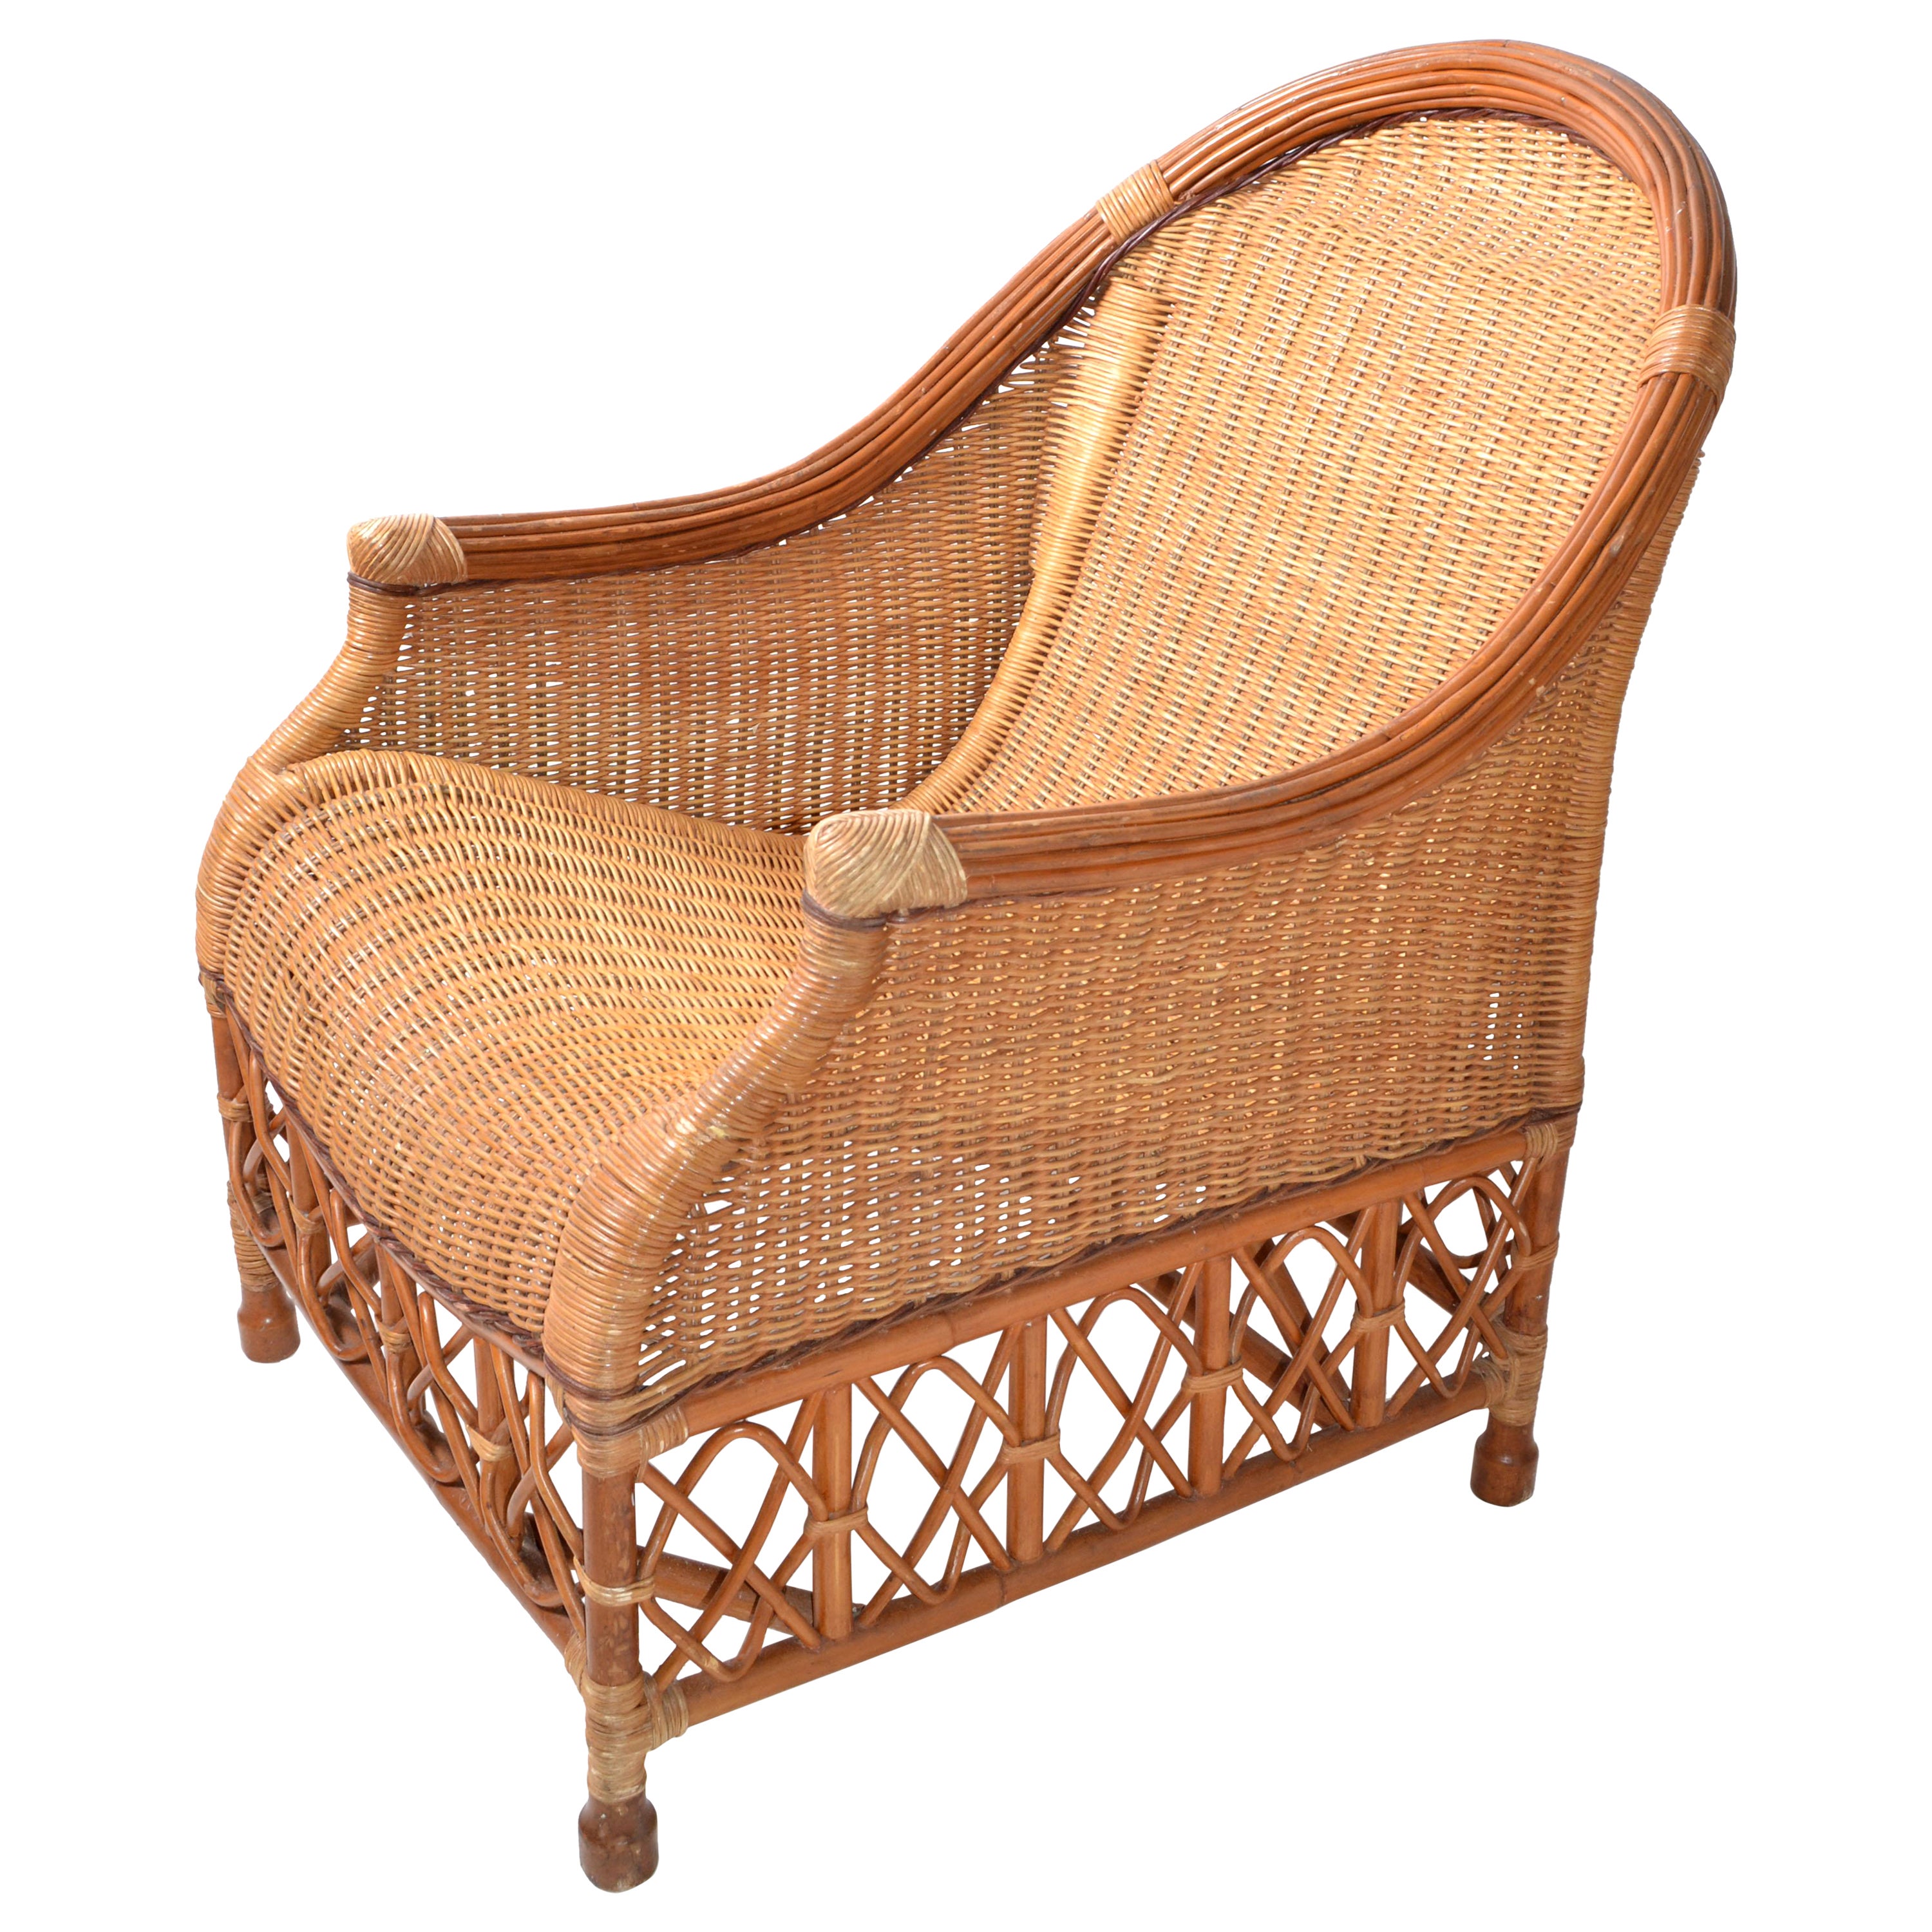 Bamboo, Cane & Wicker Lounge Chair Handwoven Bohemian 1960 Mid-Century Modern For Sale